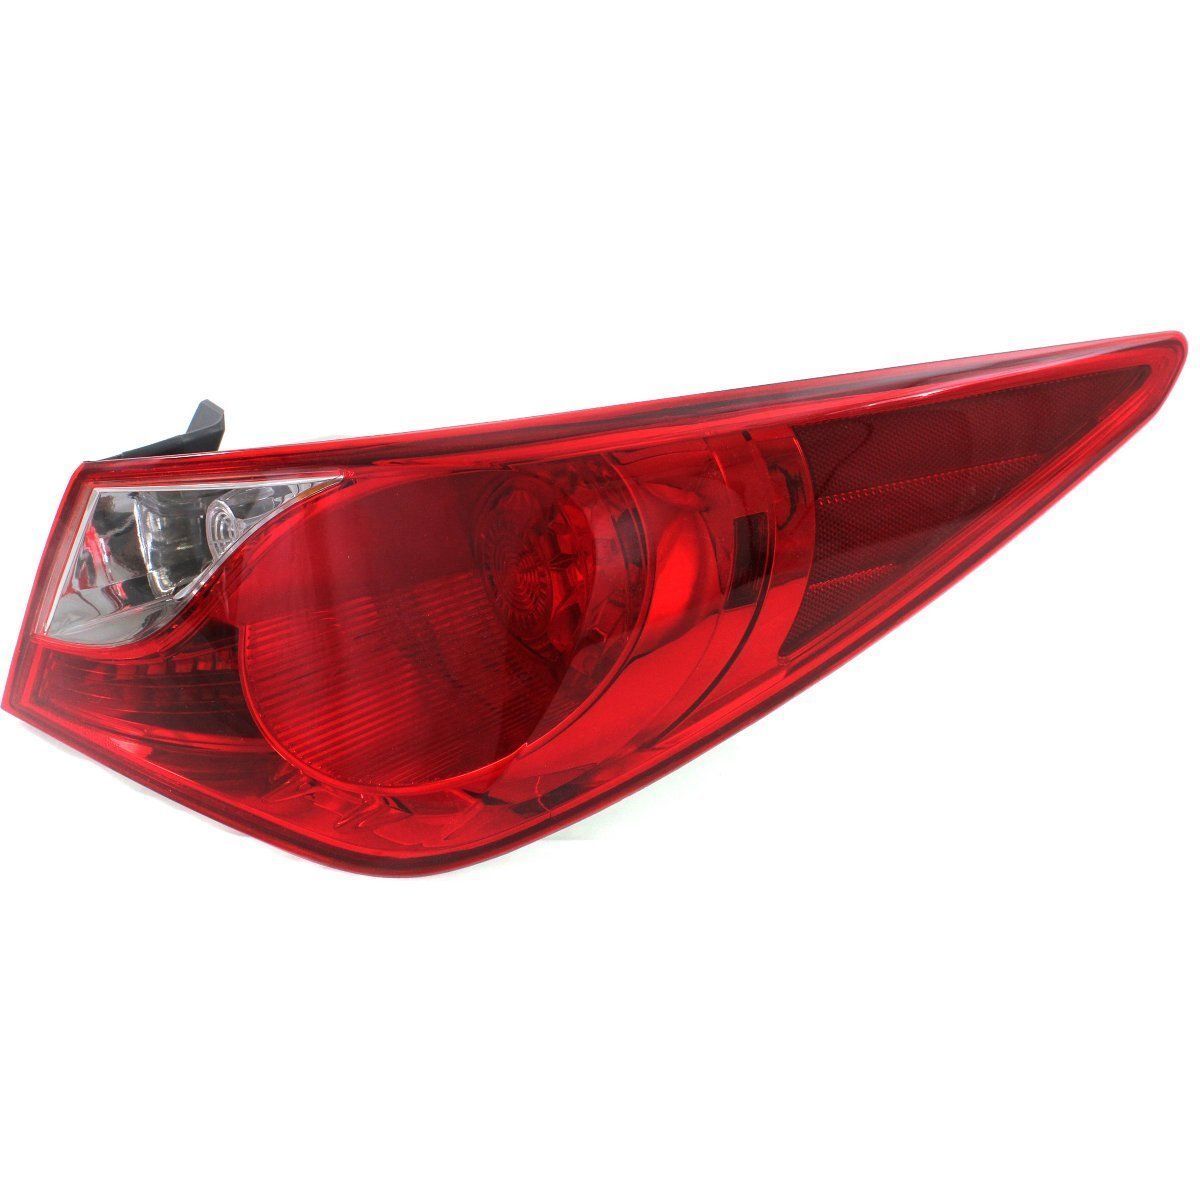 TYC FOR HY SONATA 2011 2012 2013 2014 REAR TAIL LAMP RIGHT PASSENGER 924023Q000 